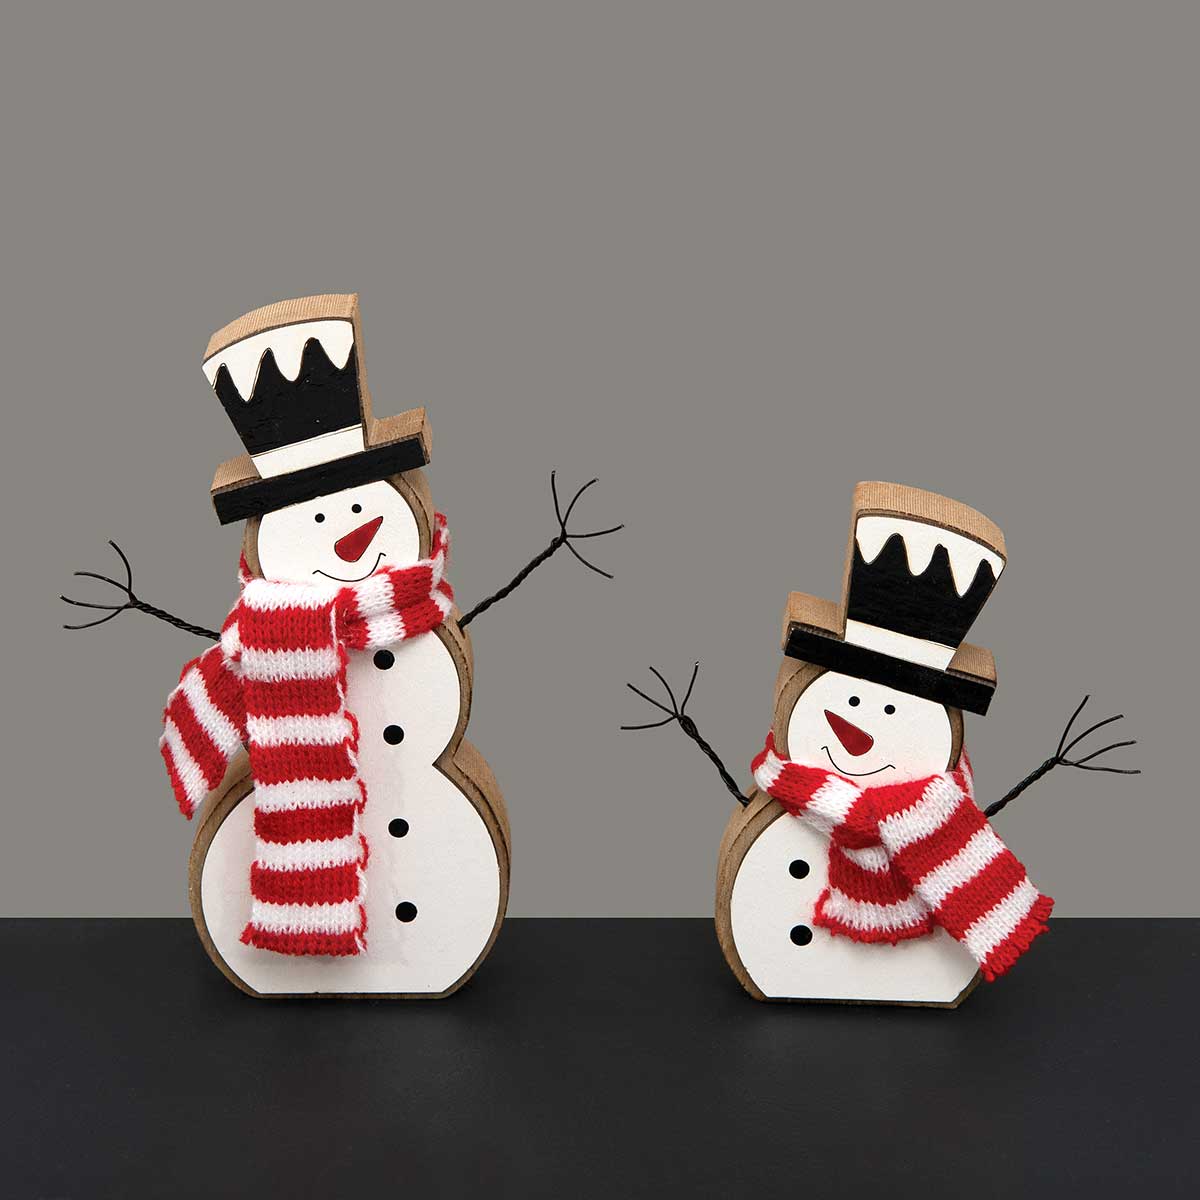 SIT-A-BOUT SNOWMAN SMALL 4.5IN X 1IN X 4.5IN WHITE/RED/BLACK